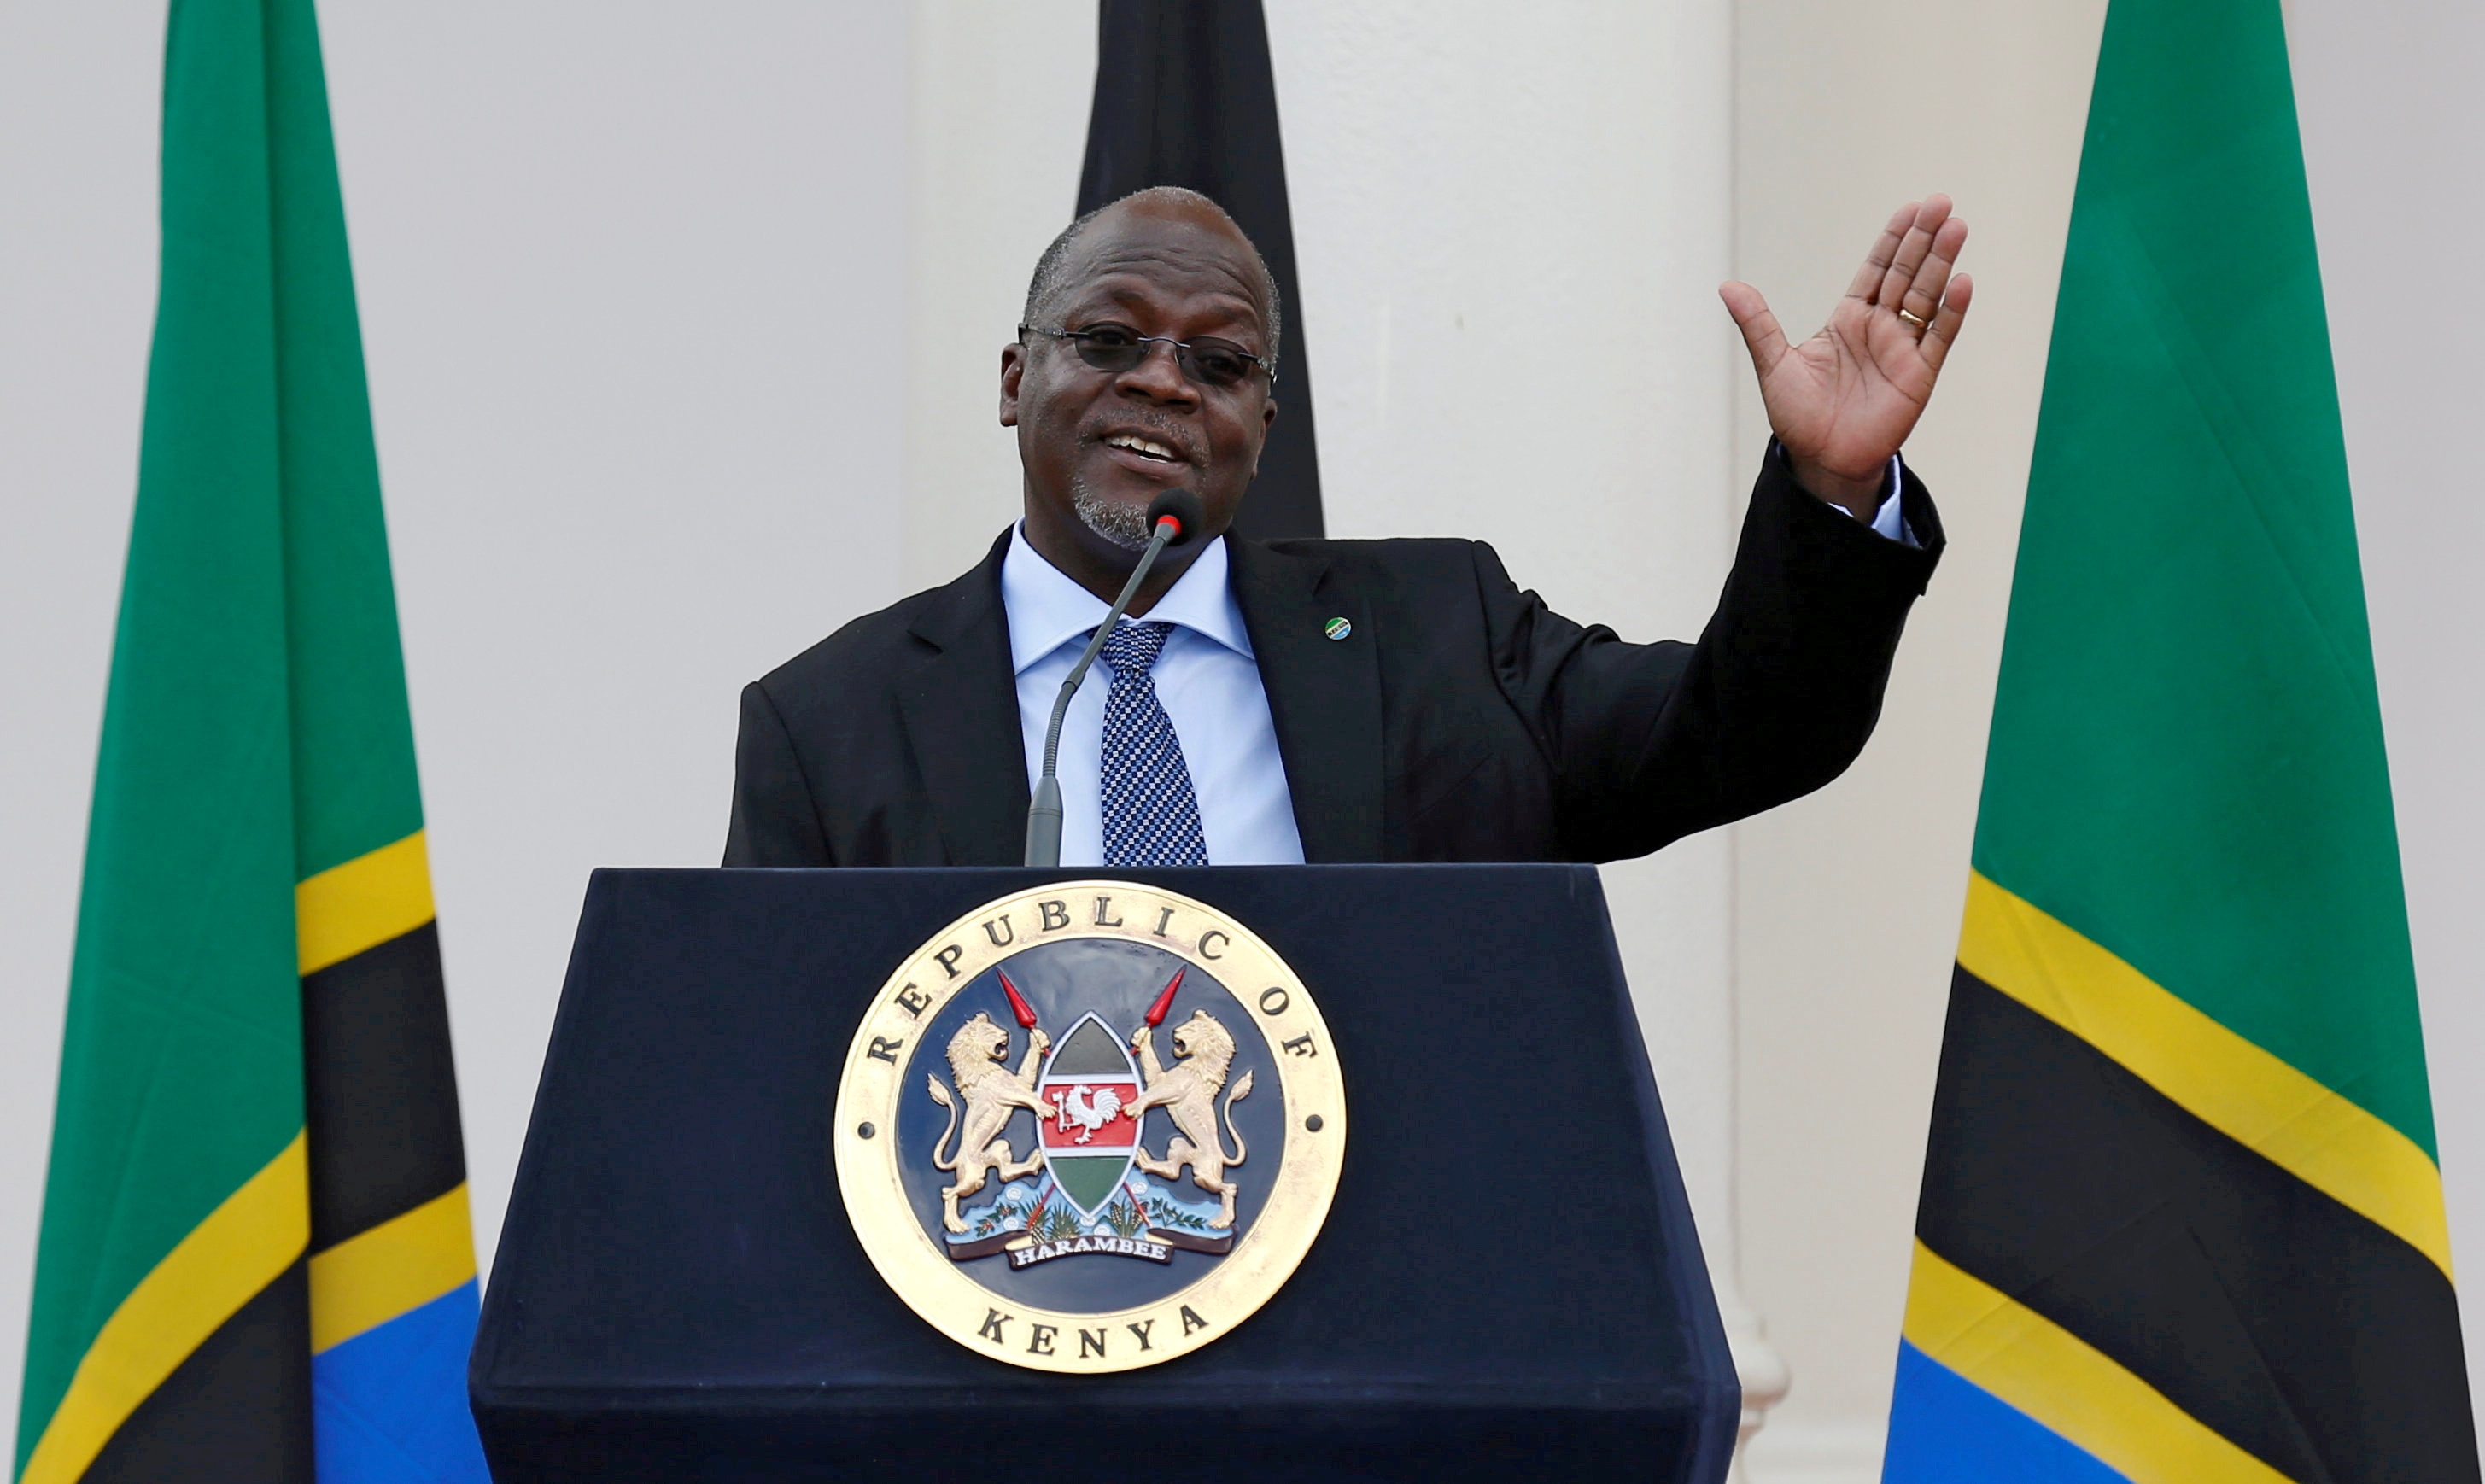 Tanzania's President Magufuli addresses a news conference during his official visit to Nairobi